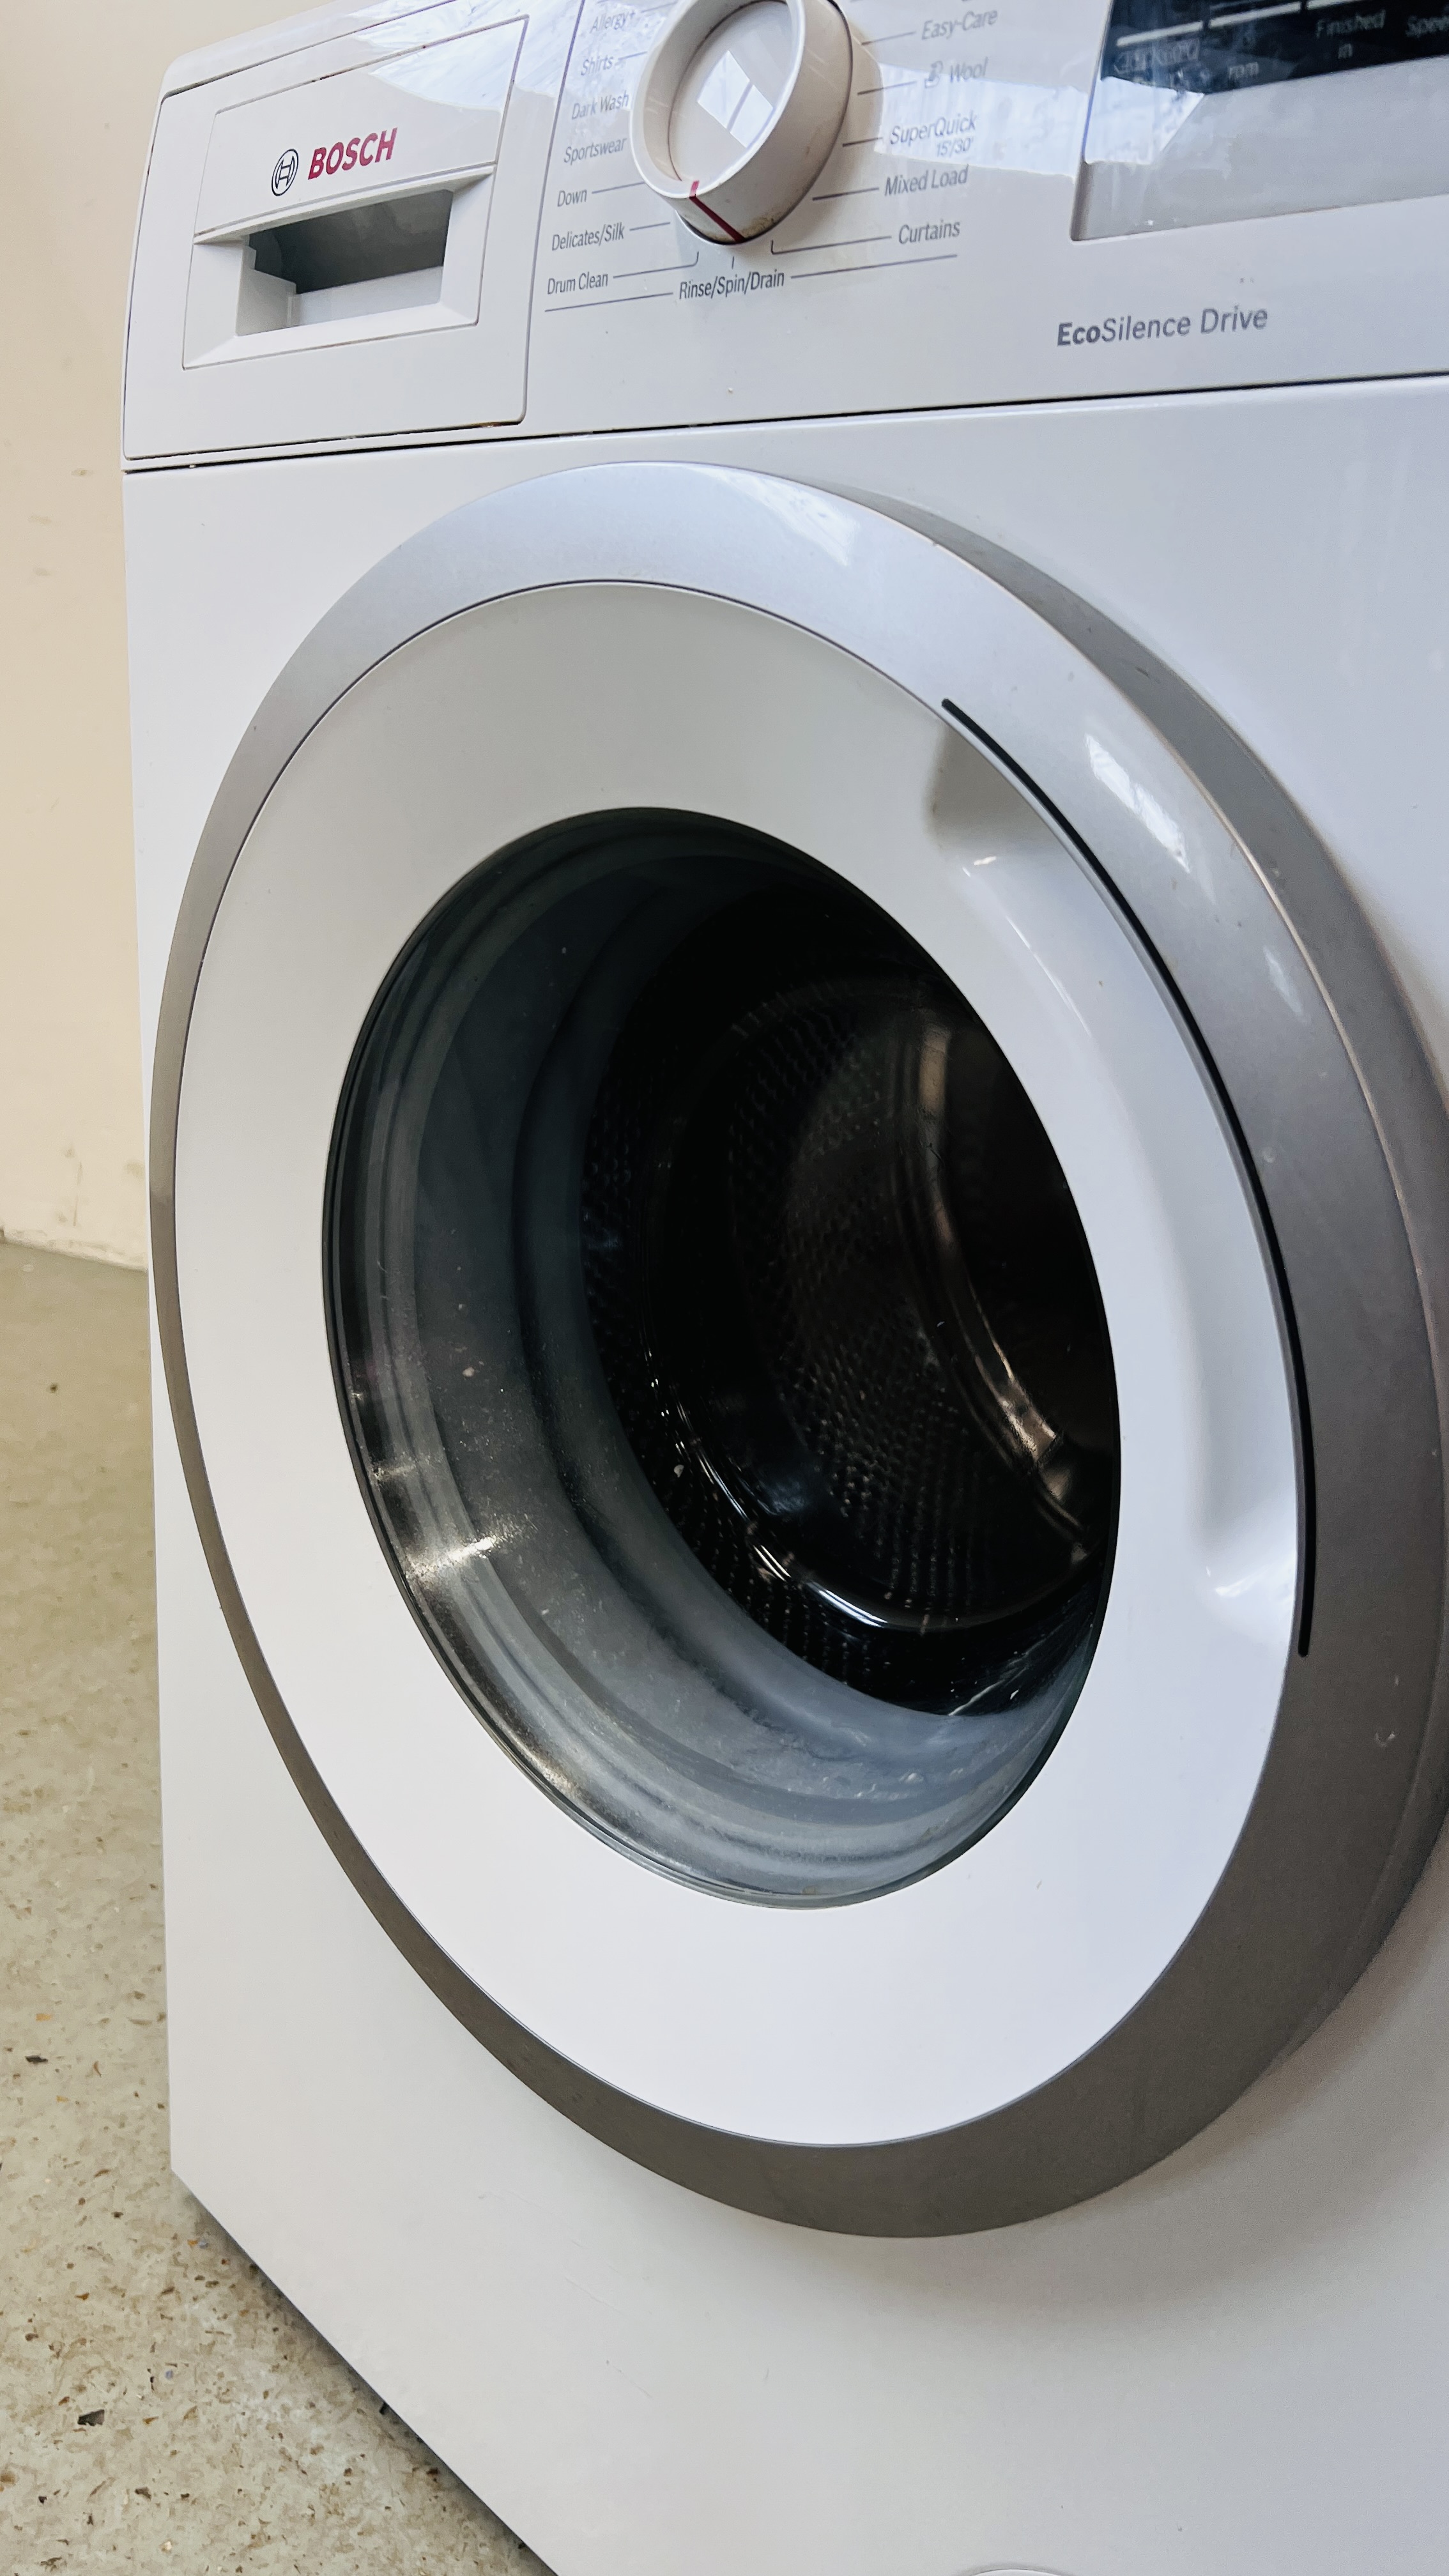 A BOSCH SERI 4 VARIOPERFECT ECO SILENCE DRIVE WASHING MACHINE - SOLD AS SEEN. - Image 6 of 10